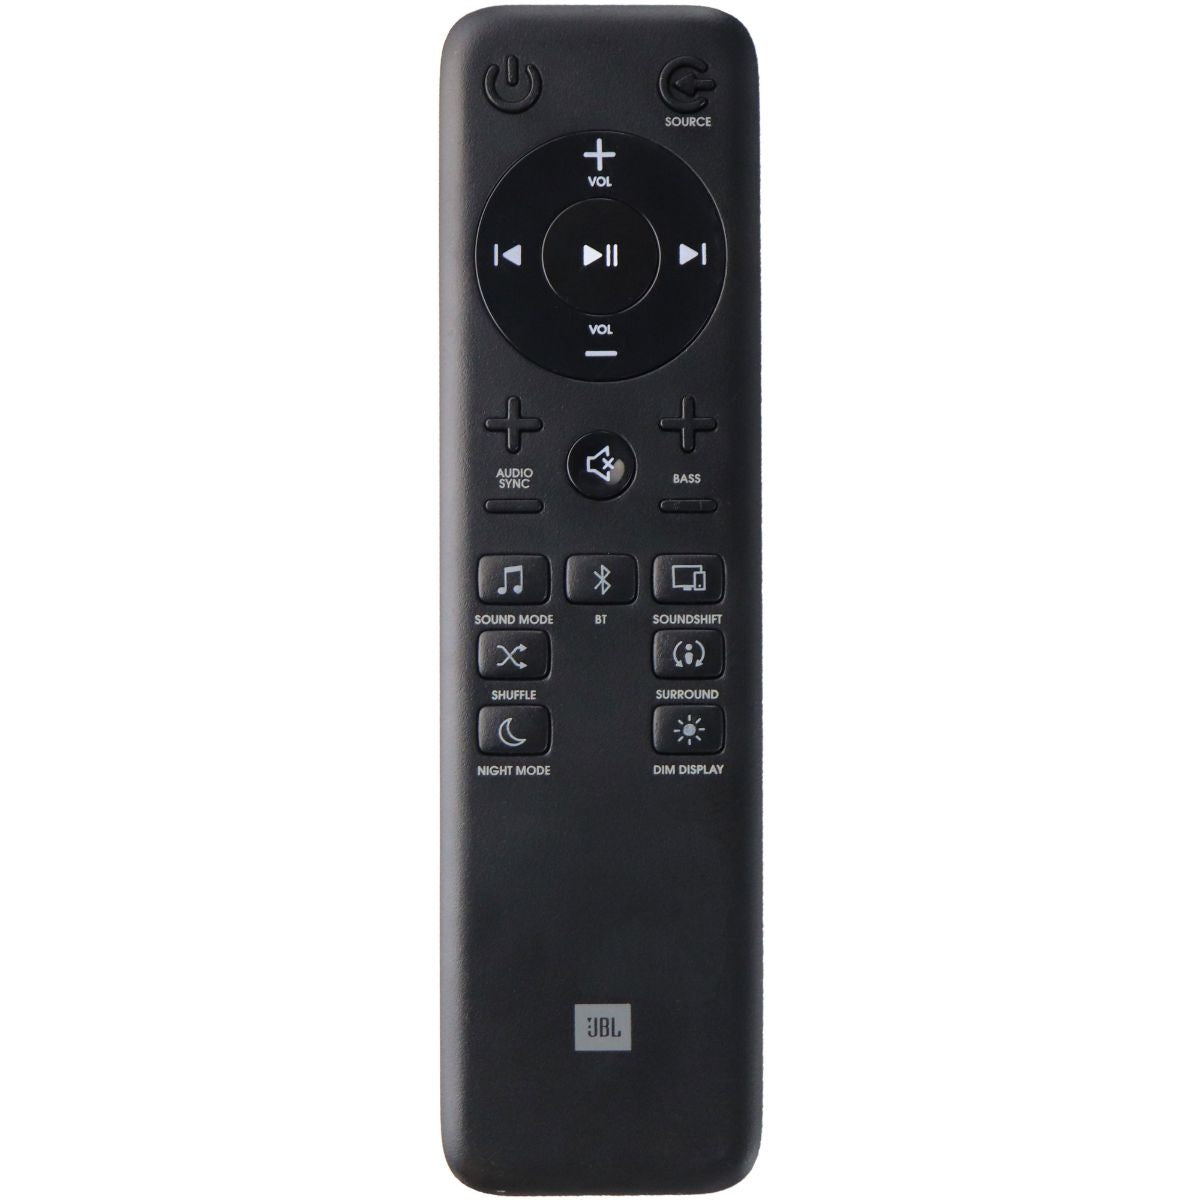 JBL Remote Control (VQB1760J) for Select JBL Audio Systems - Black TV, Video & Audio Accessories - Remote Controls JBL    - Simple Cell Bulk Wholesale Pricing - USA Seller